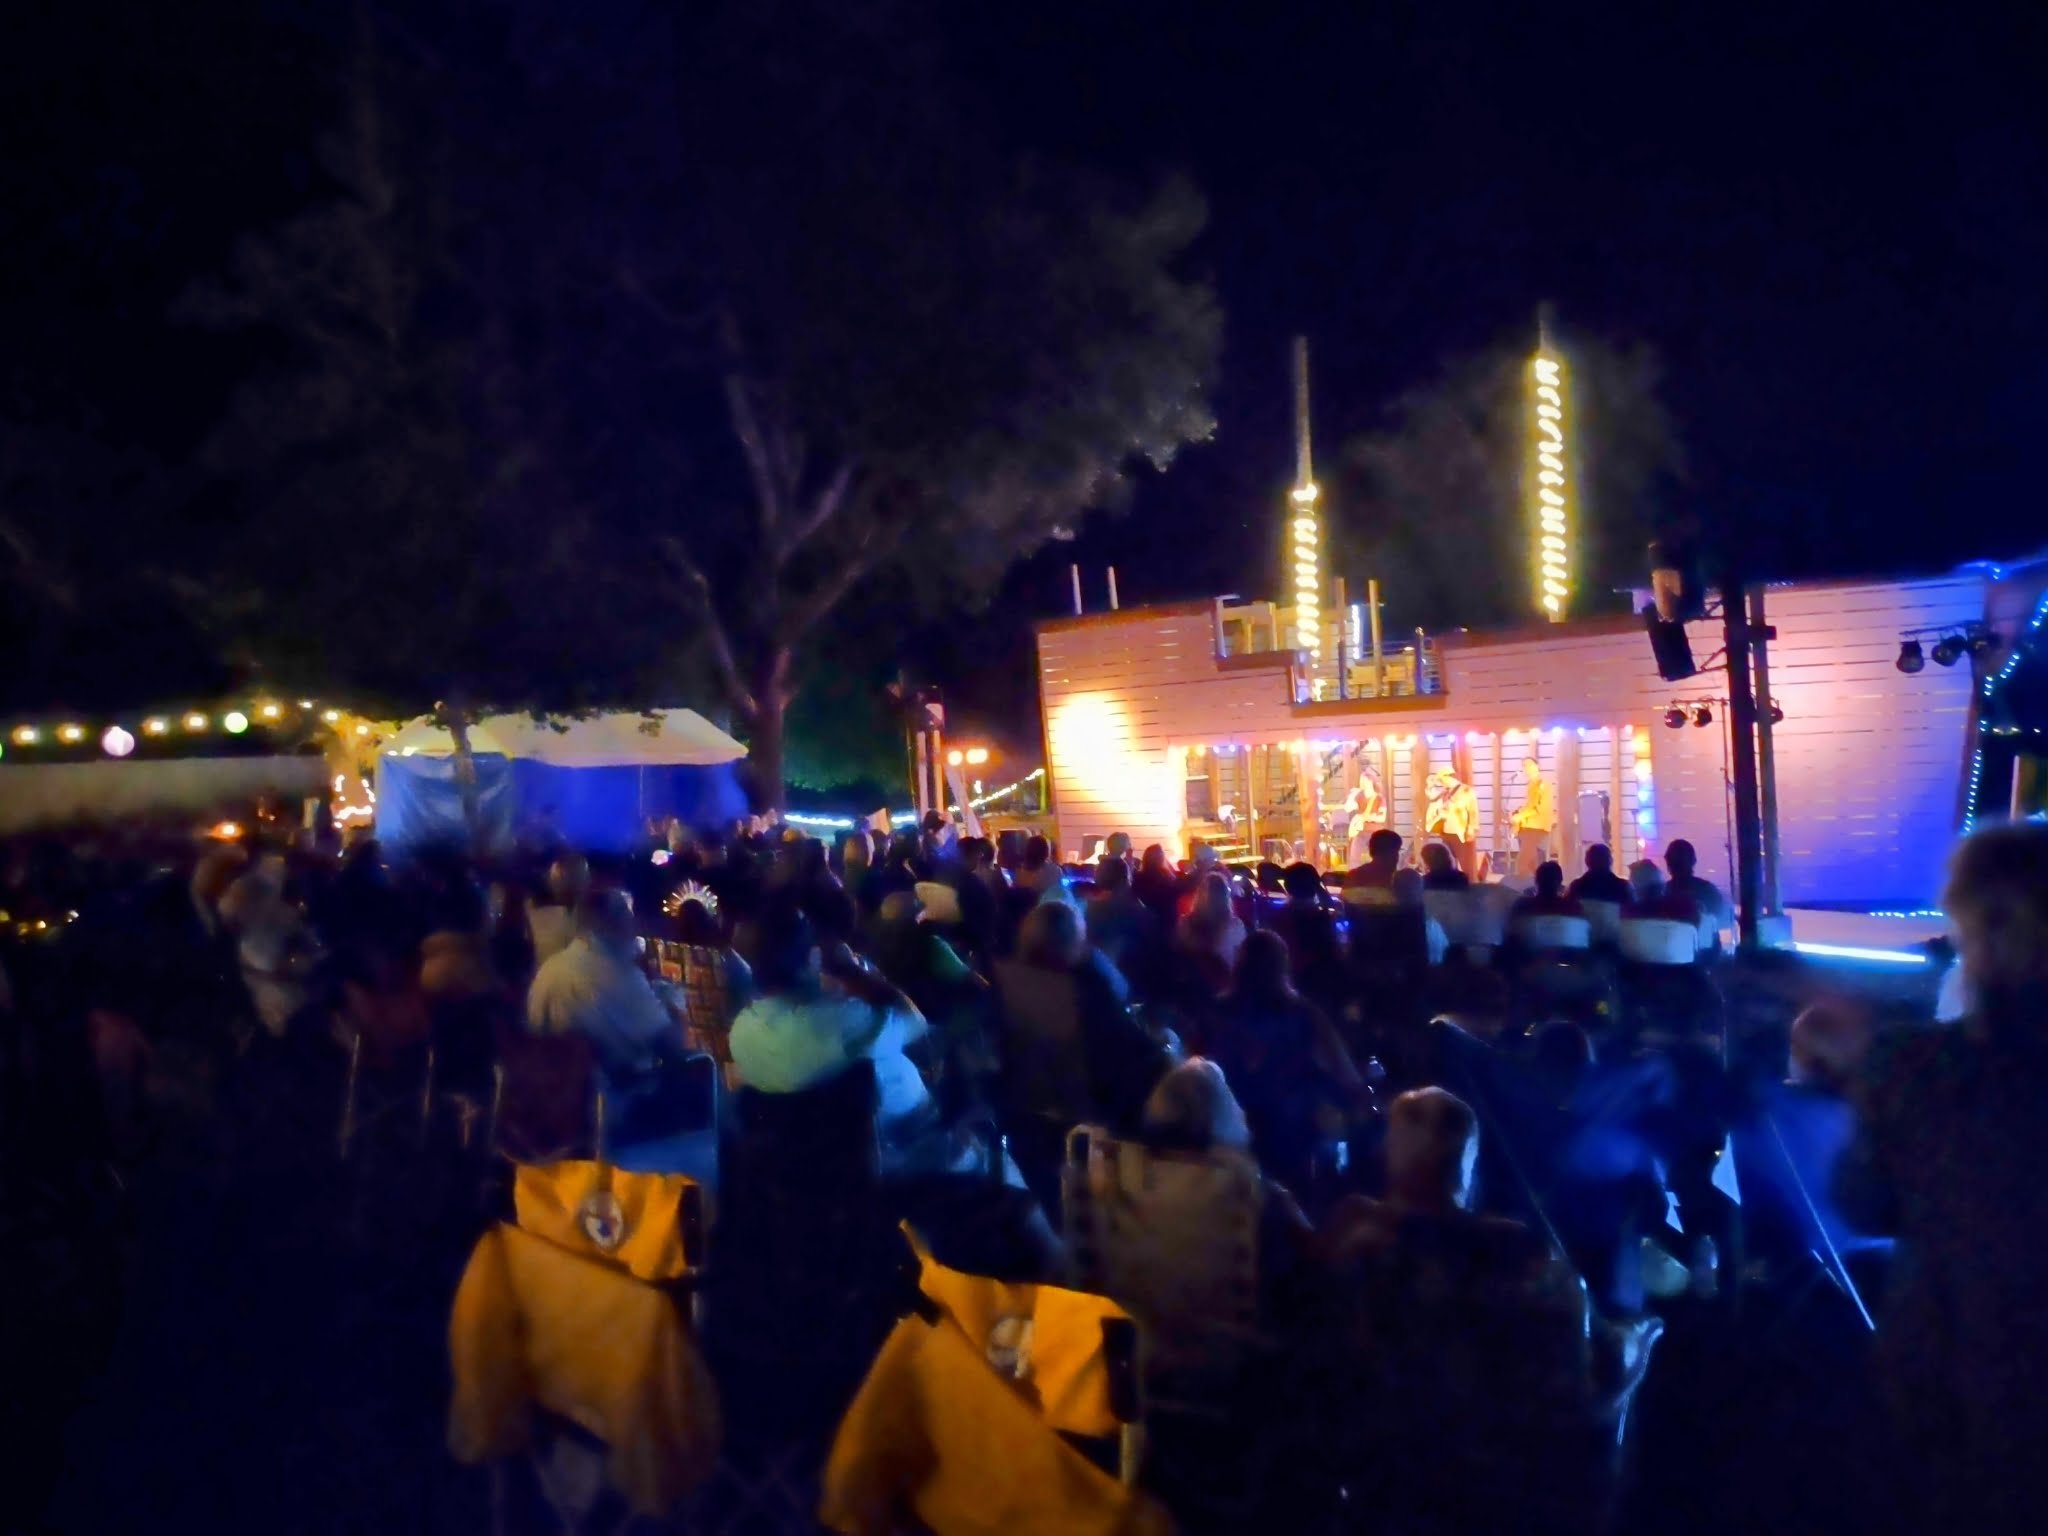 A crowd watches a performance on a pirate ship stage at night